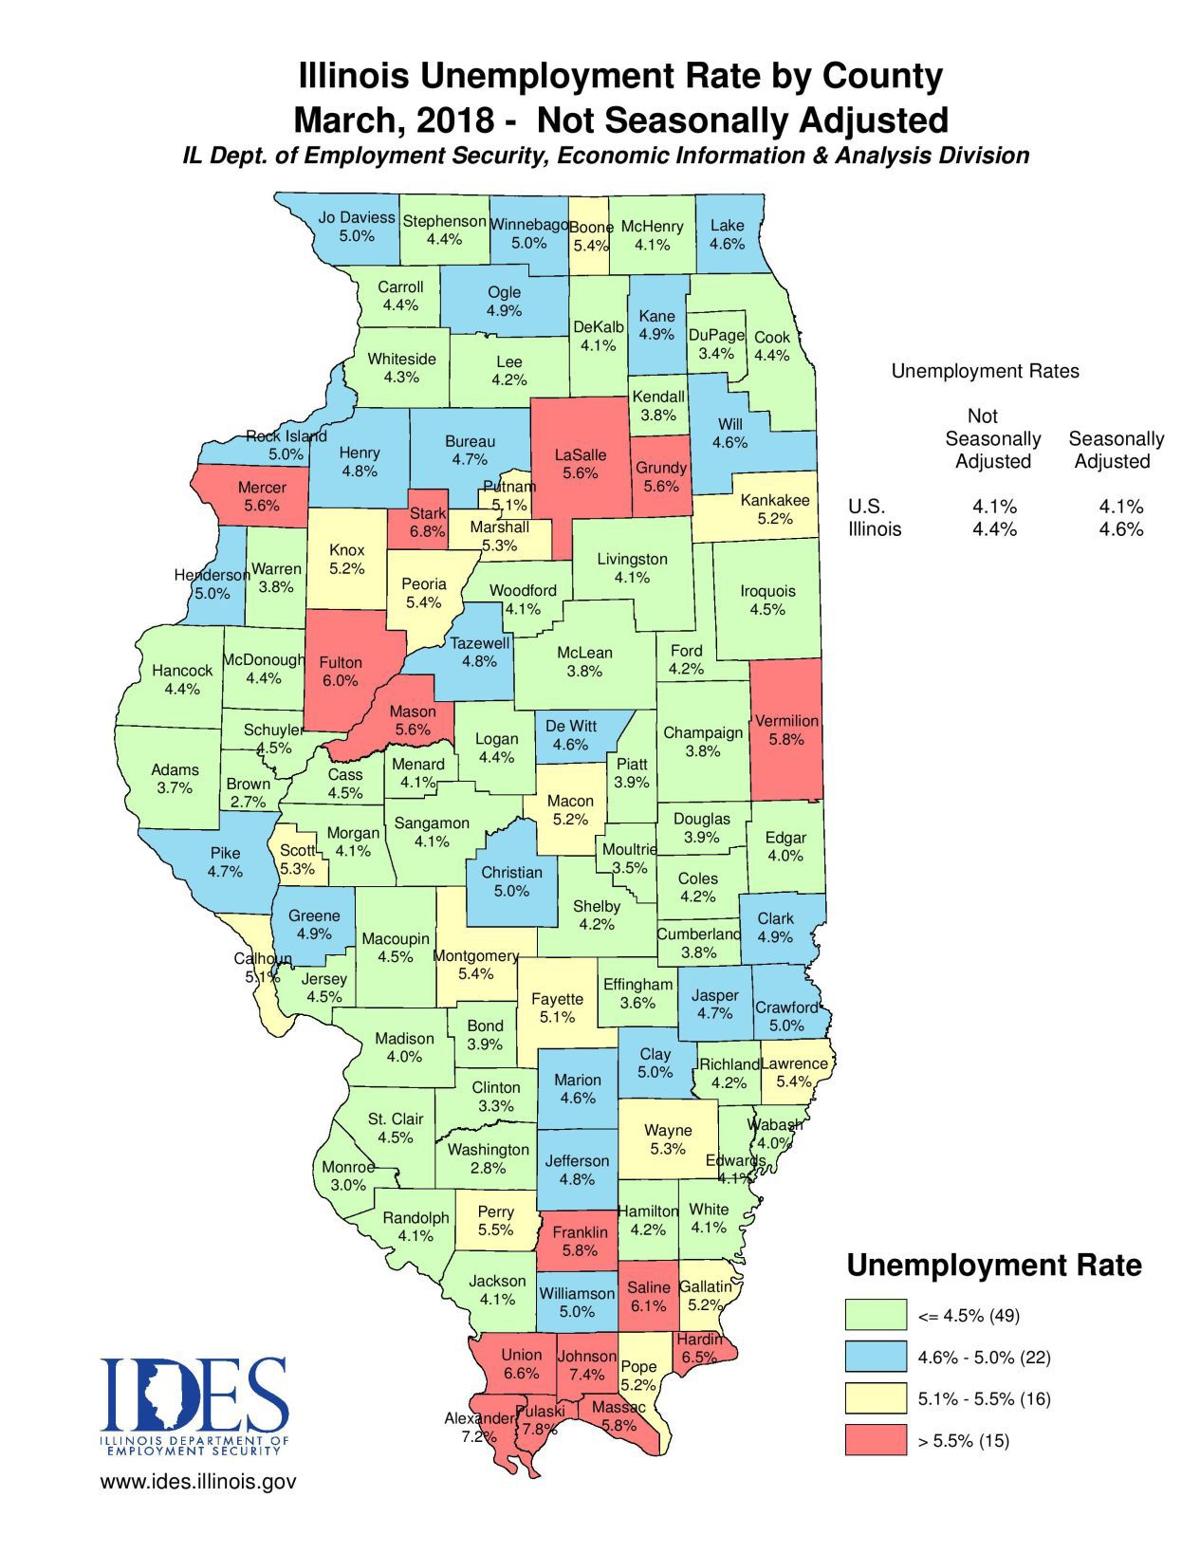 Central Illinois unemployment rate up slightly in March Local